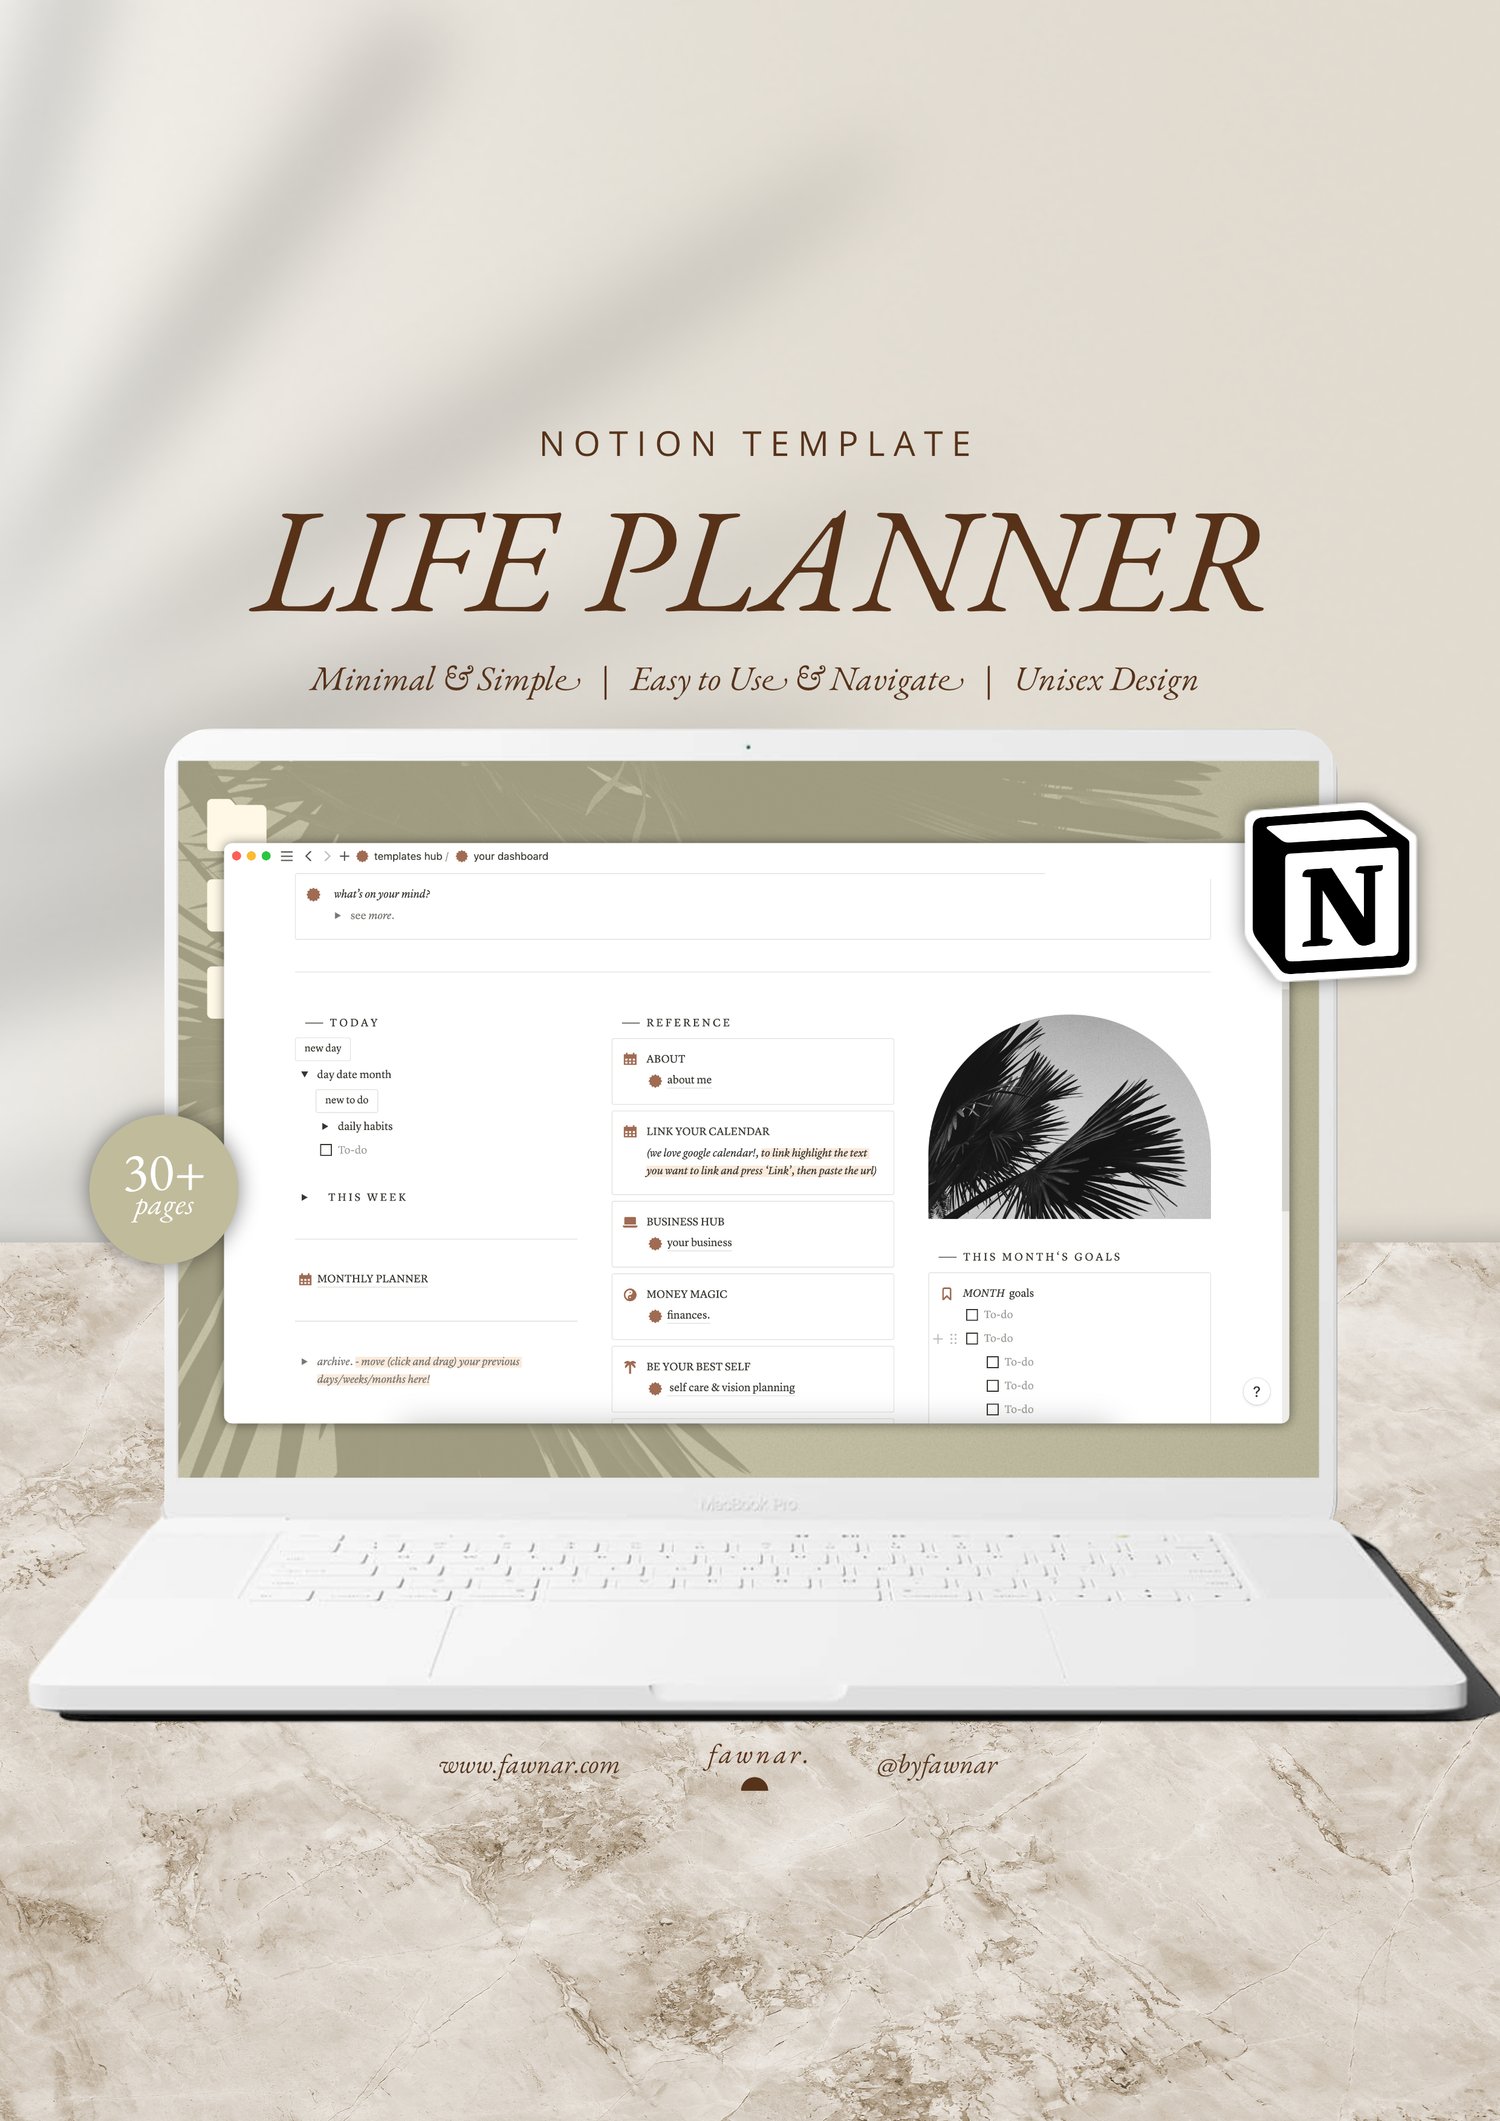 Notion Life Planner Template  Minimal & Simple — fawnar.